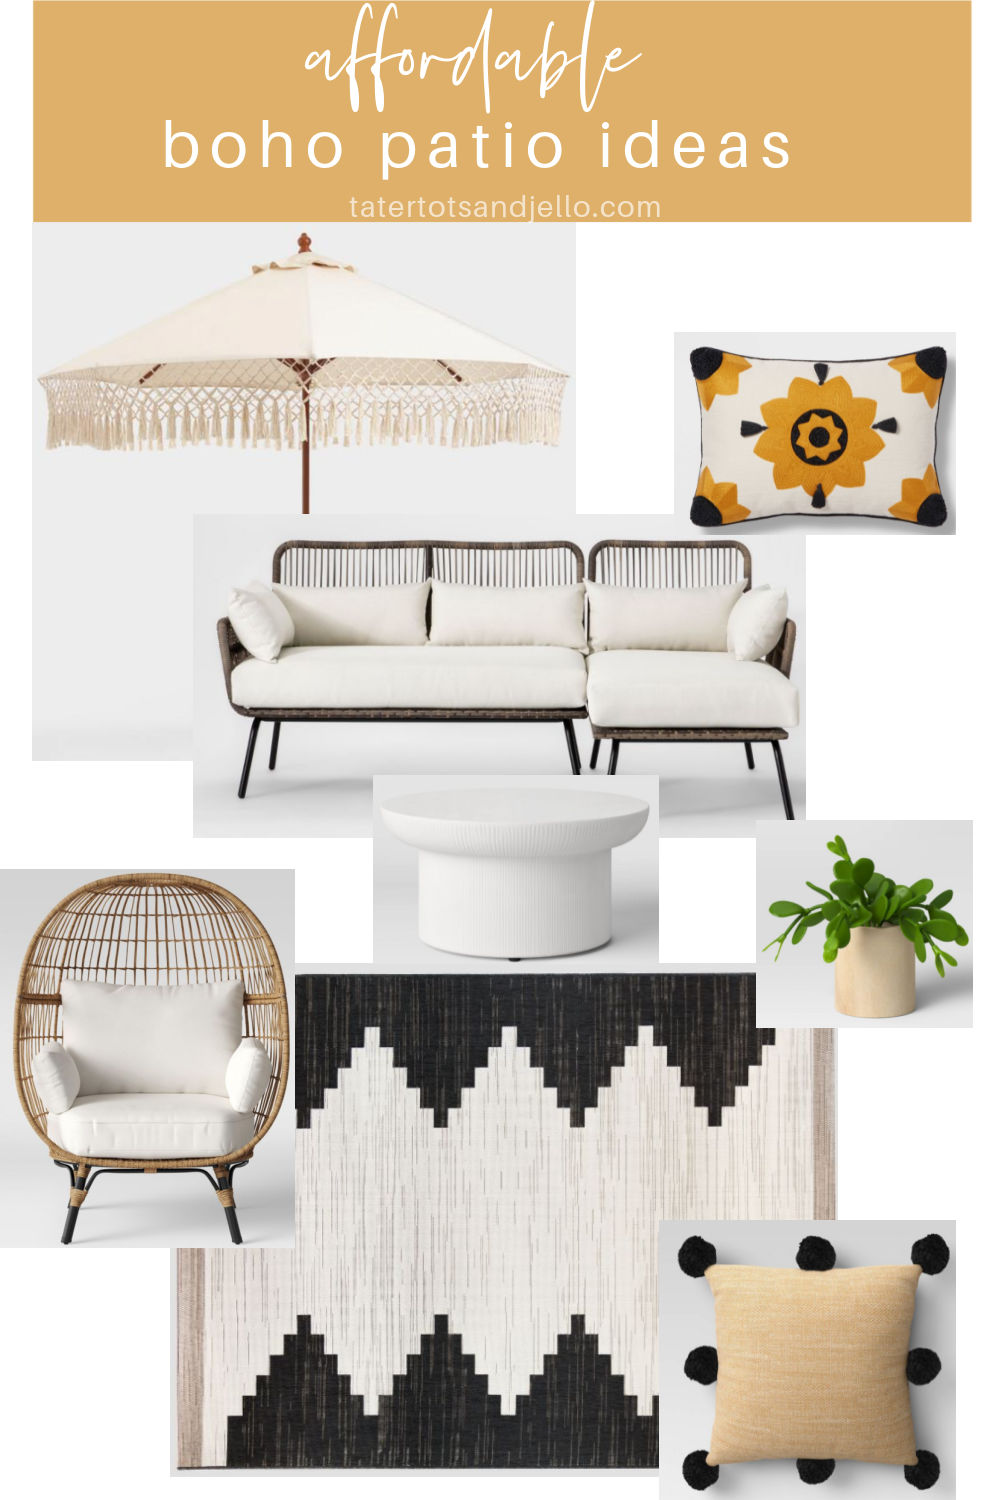 Three Different Spring Patio Ideas. No matter your style, I'm sharing beautiful and affordable items that will make your patio an amazing oasis this summer!